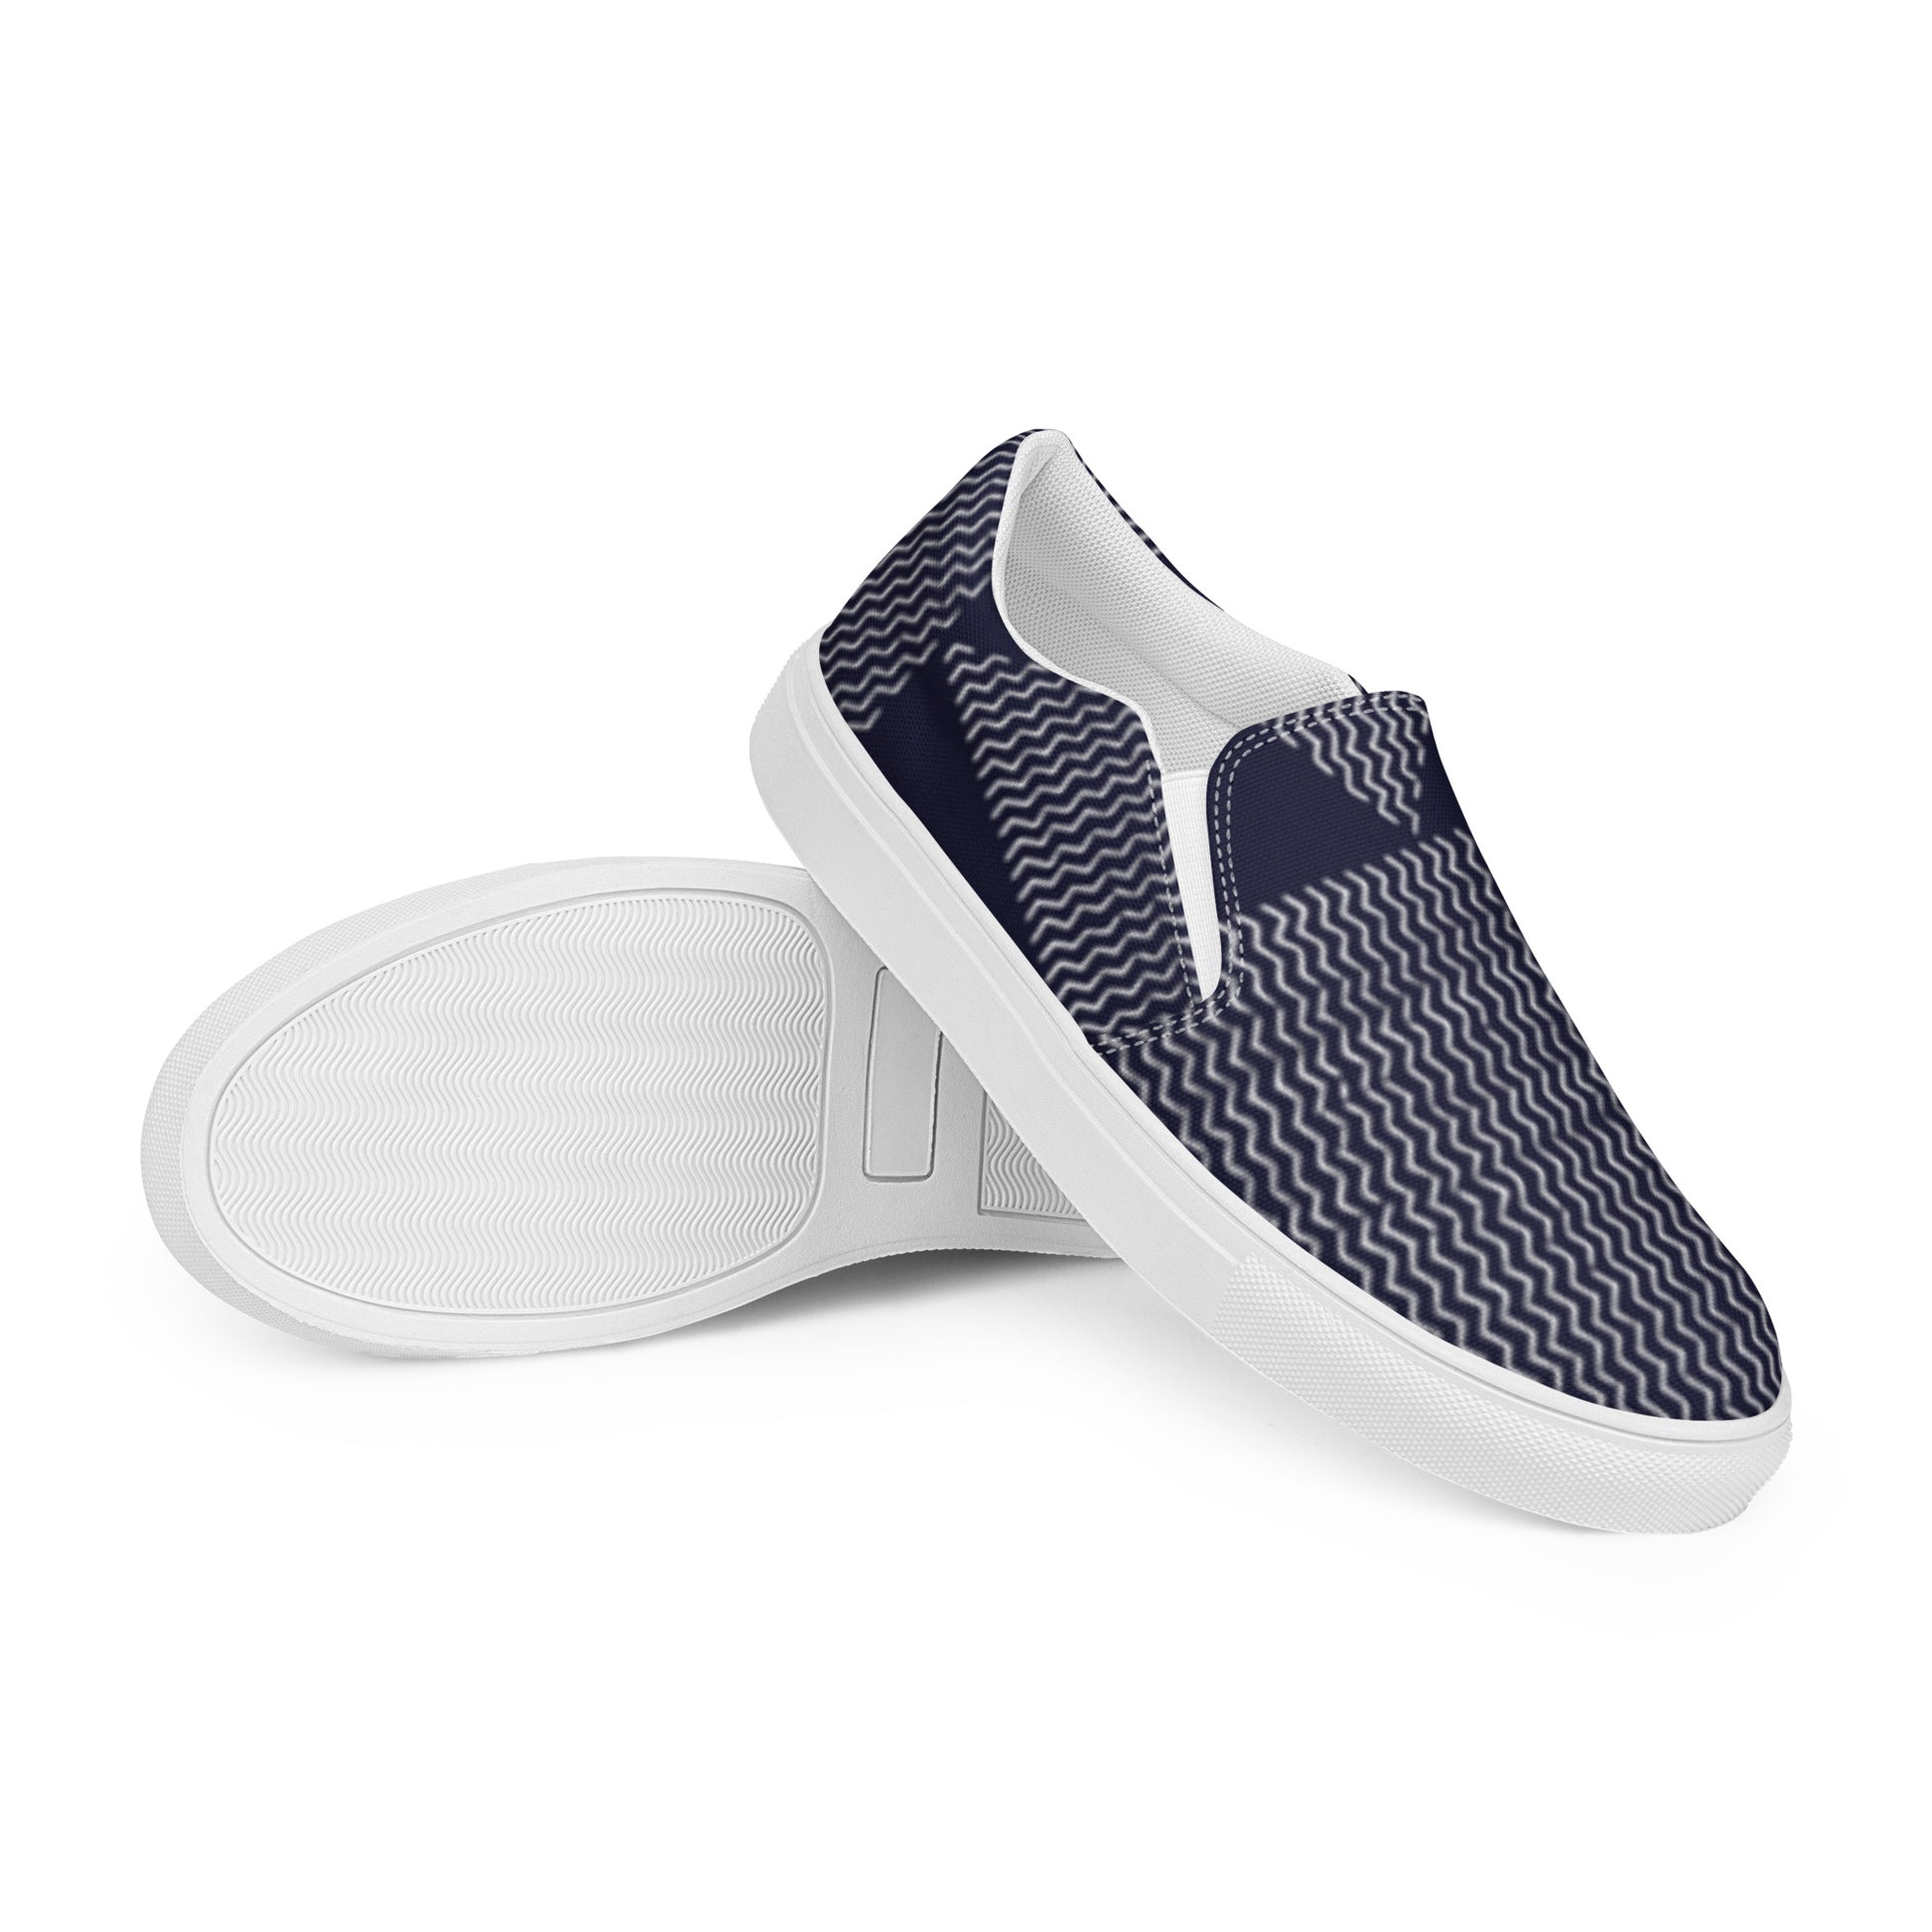 Ocean Odyssey Blue and White Shoes 